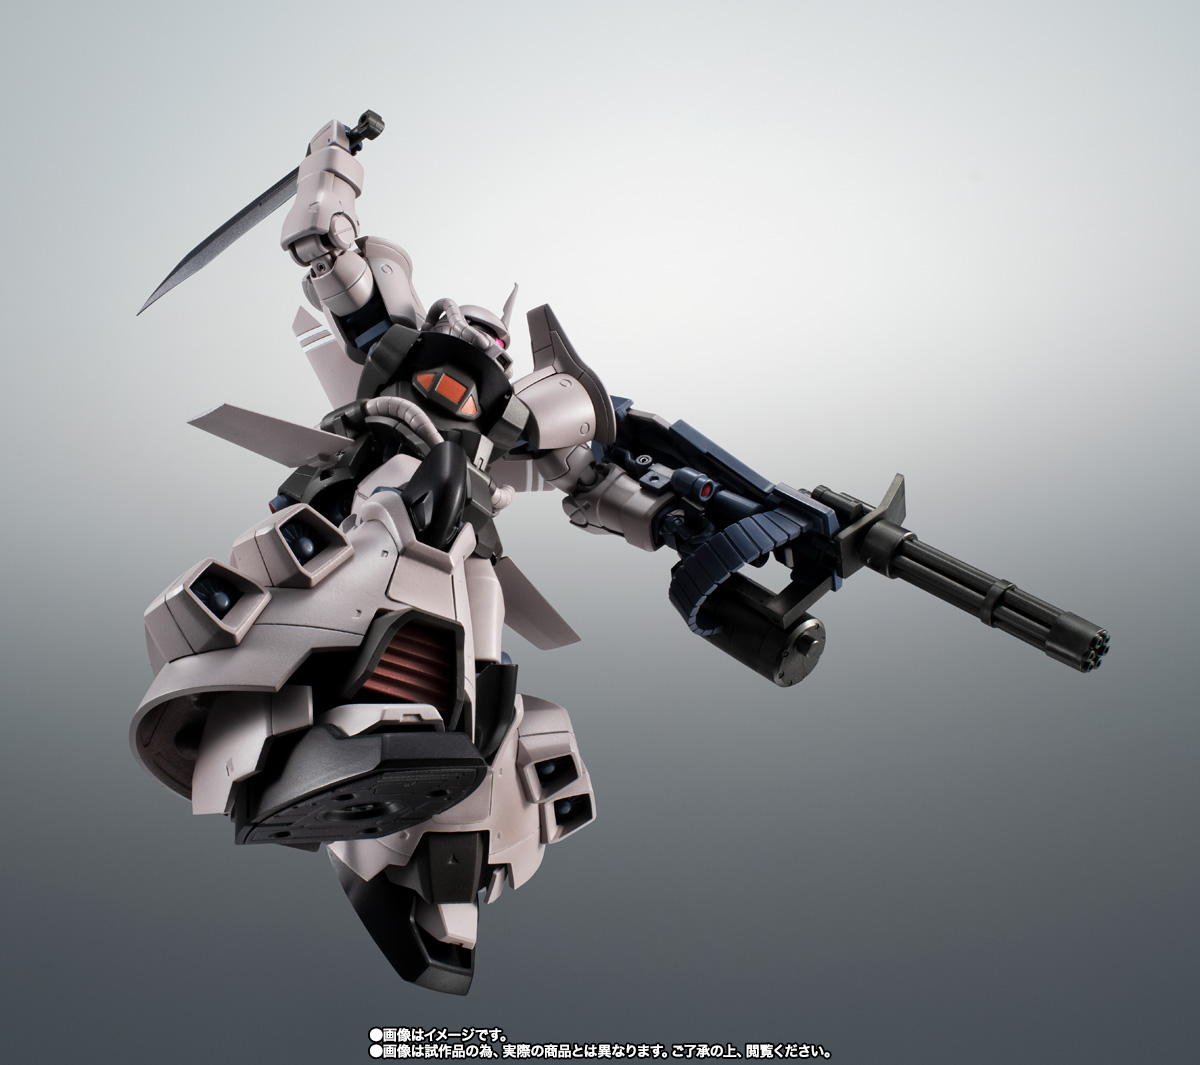 ROBOT魂 ＜SIDE MS＞ MS-07H-8 グフ・フライトタイプ ver. A.N.I.M.E.